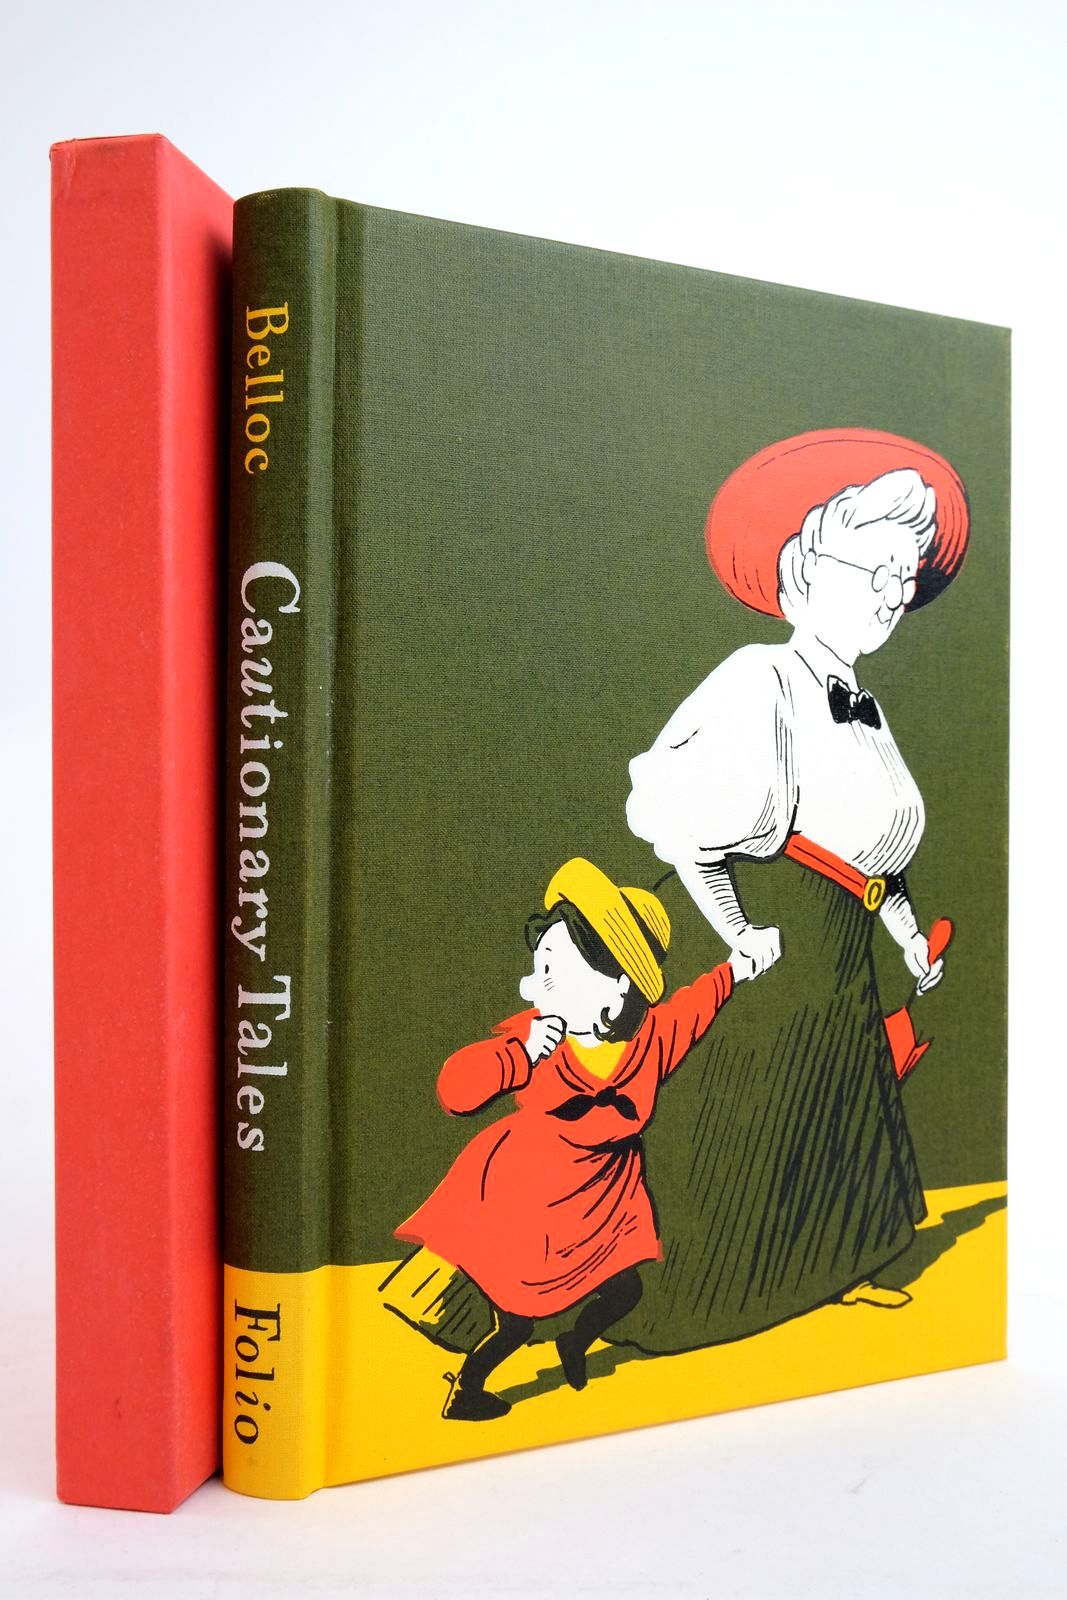 Photo of CAUTIONARY TALES AND OTHER VERSES written by Belloc, Hilaire illustrated by Simmonds, Posy published by Folio Society (STOCK CODE: 2135941)  for sale by Stella & Rose's Books